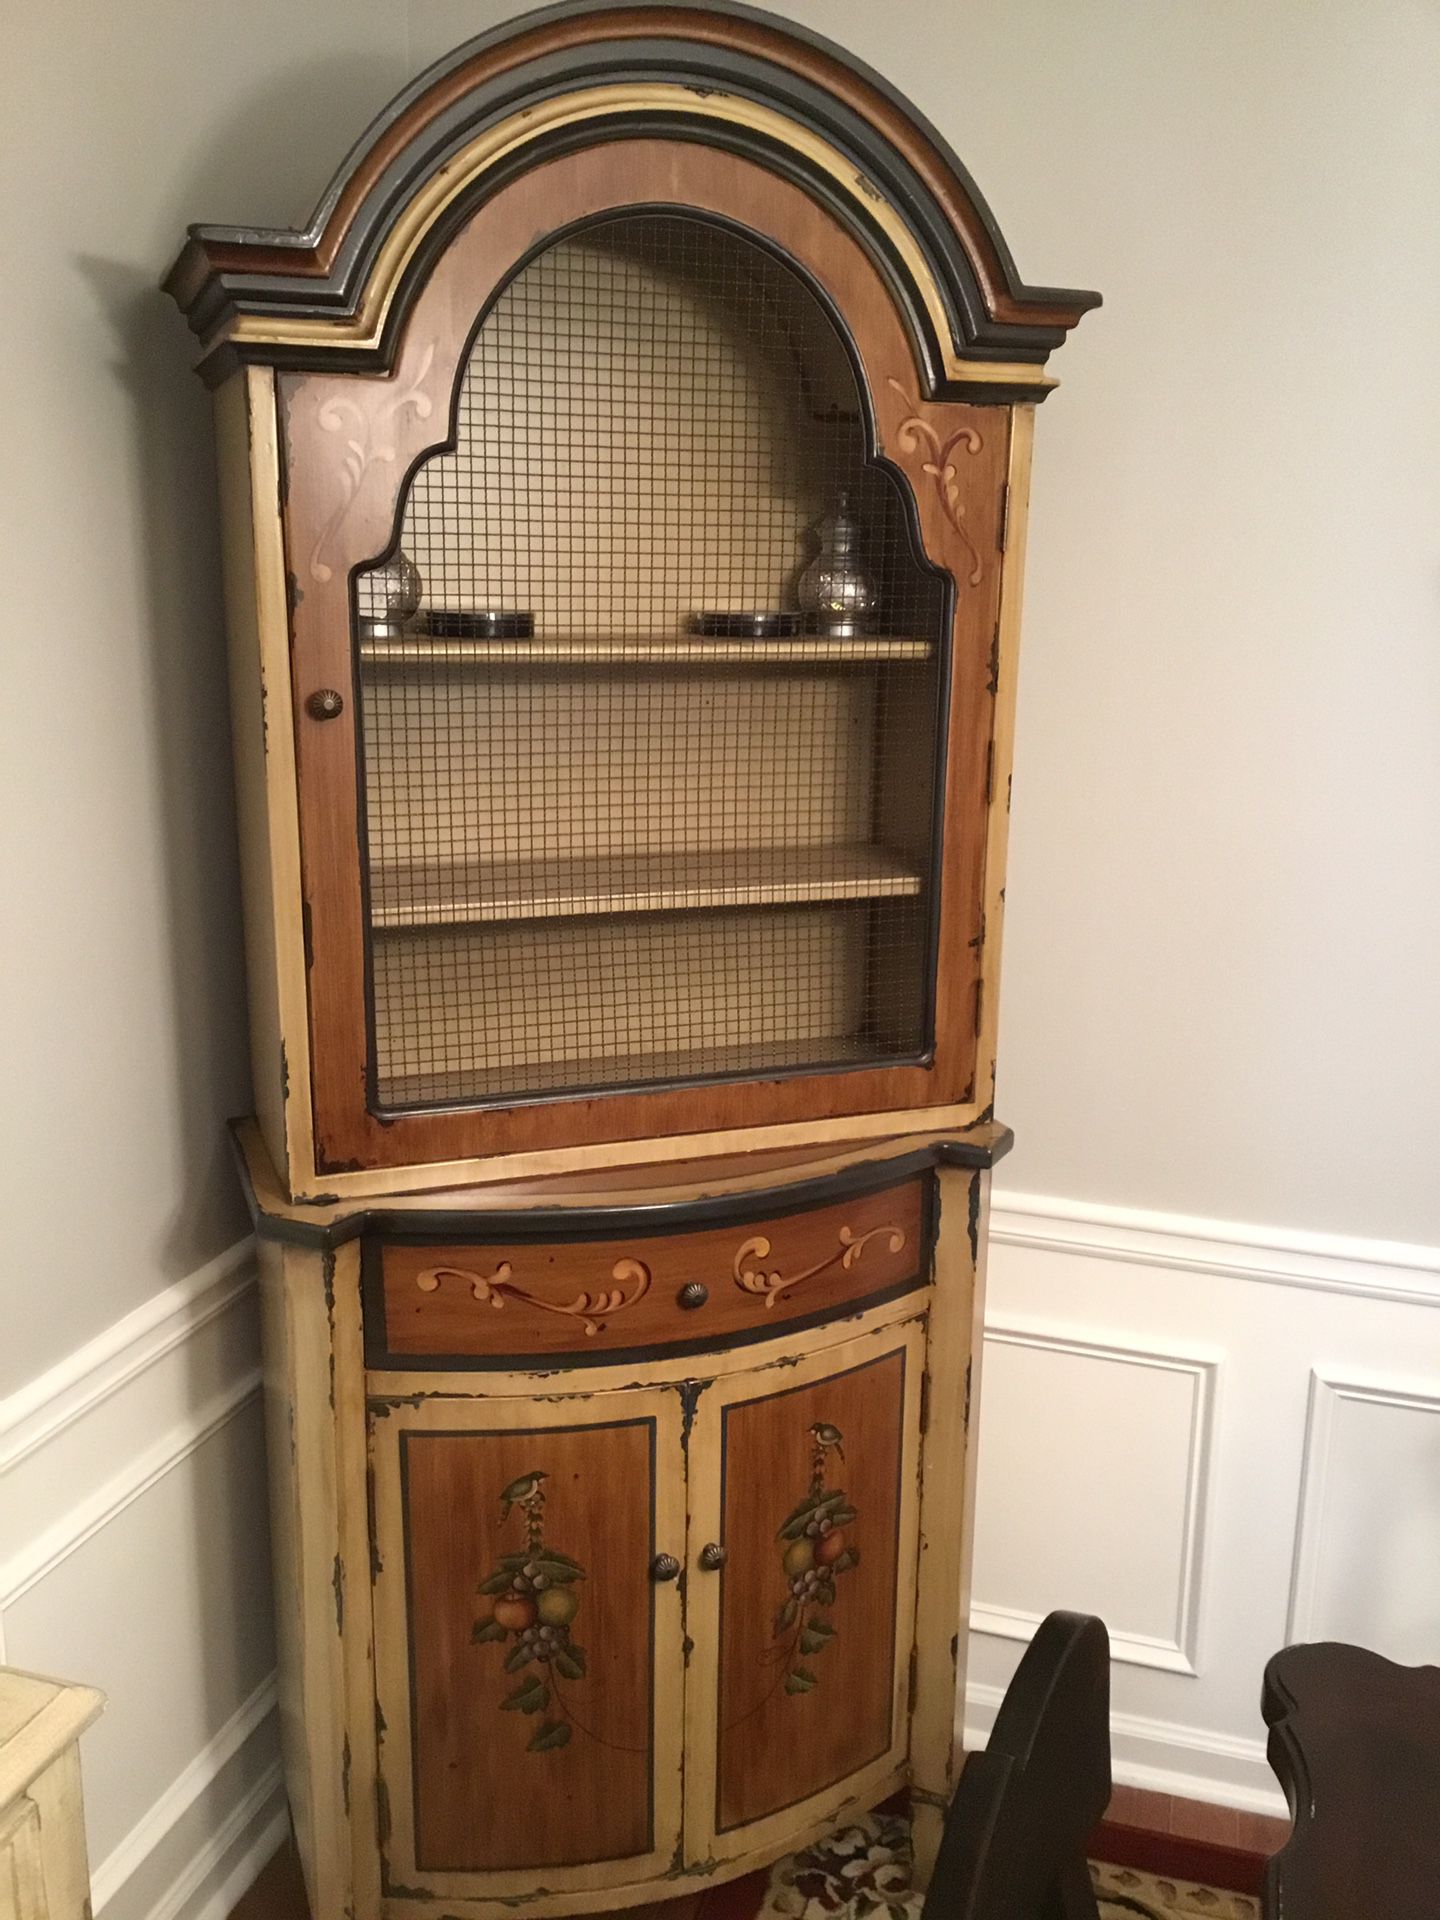 3 WOOD TONES WITH DECORATIVE PAINTING CABINET. LIKE NEW. AN BE USED IN ANY ROOM. HAS SHELVES, ONE DRAWER AND 2 DOORS FOR STORAGE. VERY WELL MADE AN